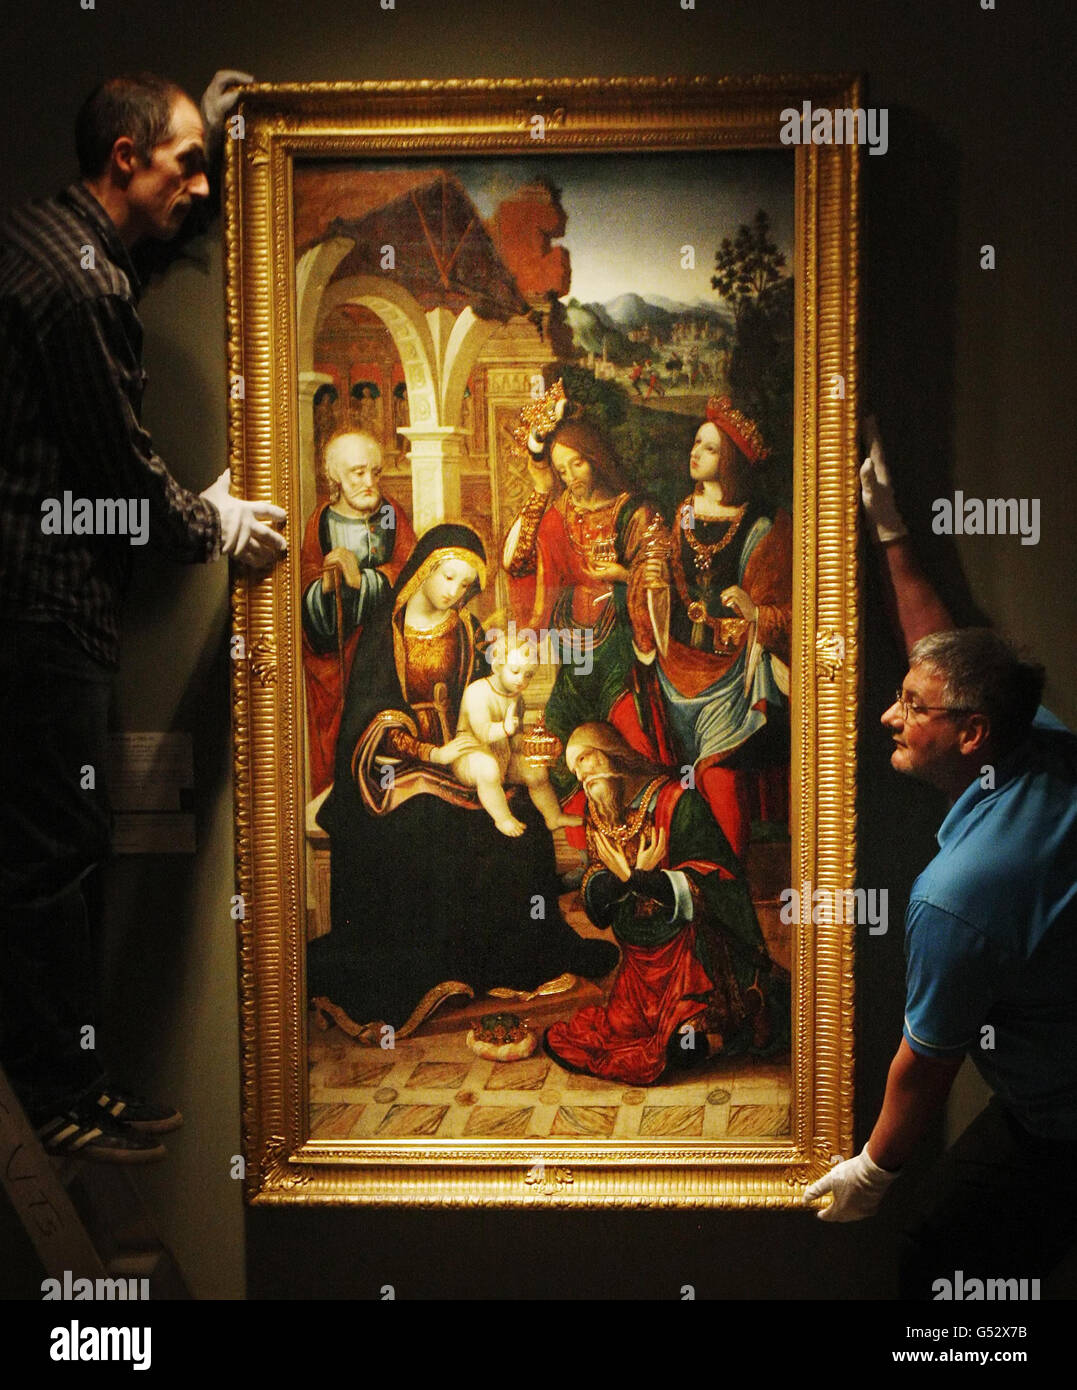 Logistics Technician David Coia (left) and Lighting Technician Fraser Campbell (right) are pictured next to painting Adoration of the Magi, ahead of the opening of exhibition Essence of Beauty: 500 years of Italian Art, at the Kelvingrove Art Gallery and Museum in Glasgow. Stock Photo